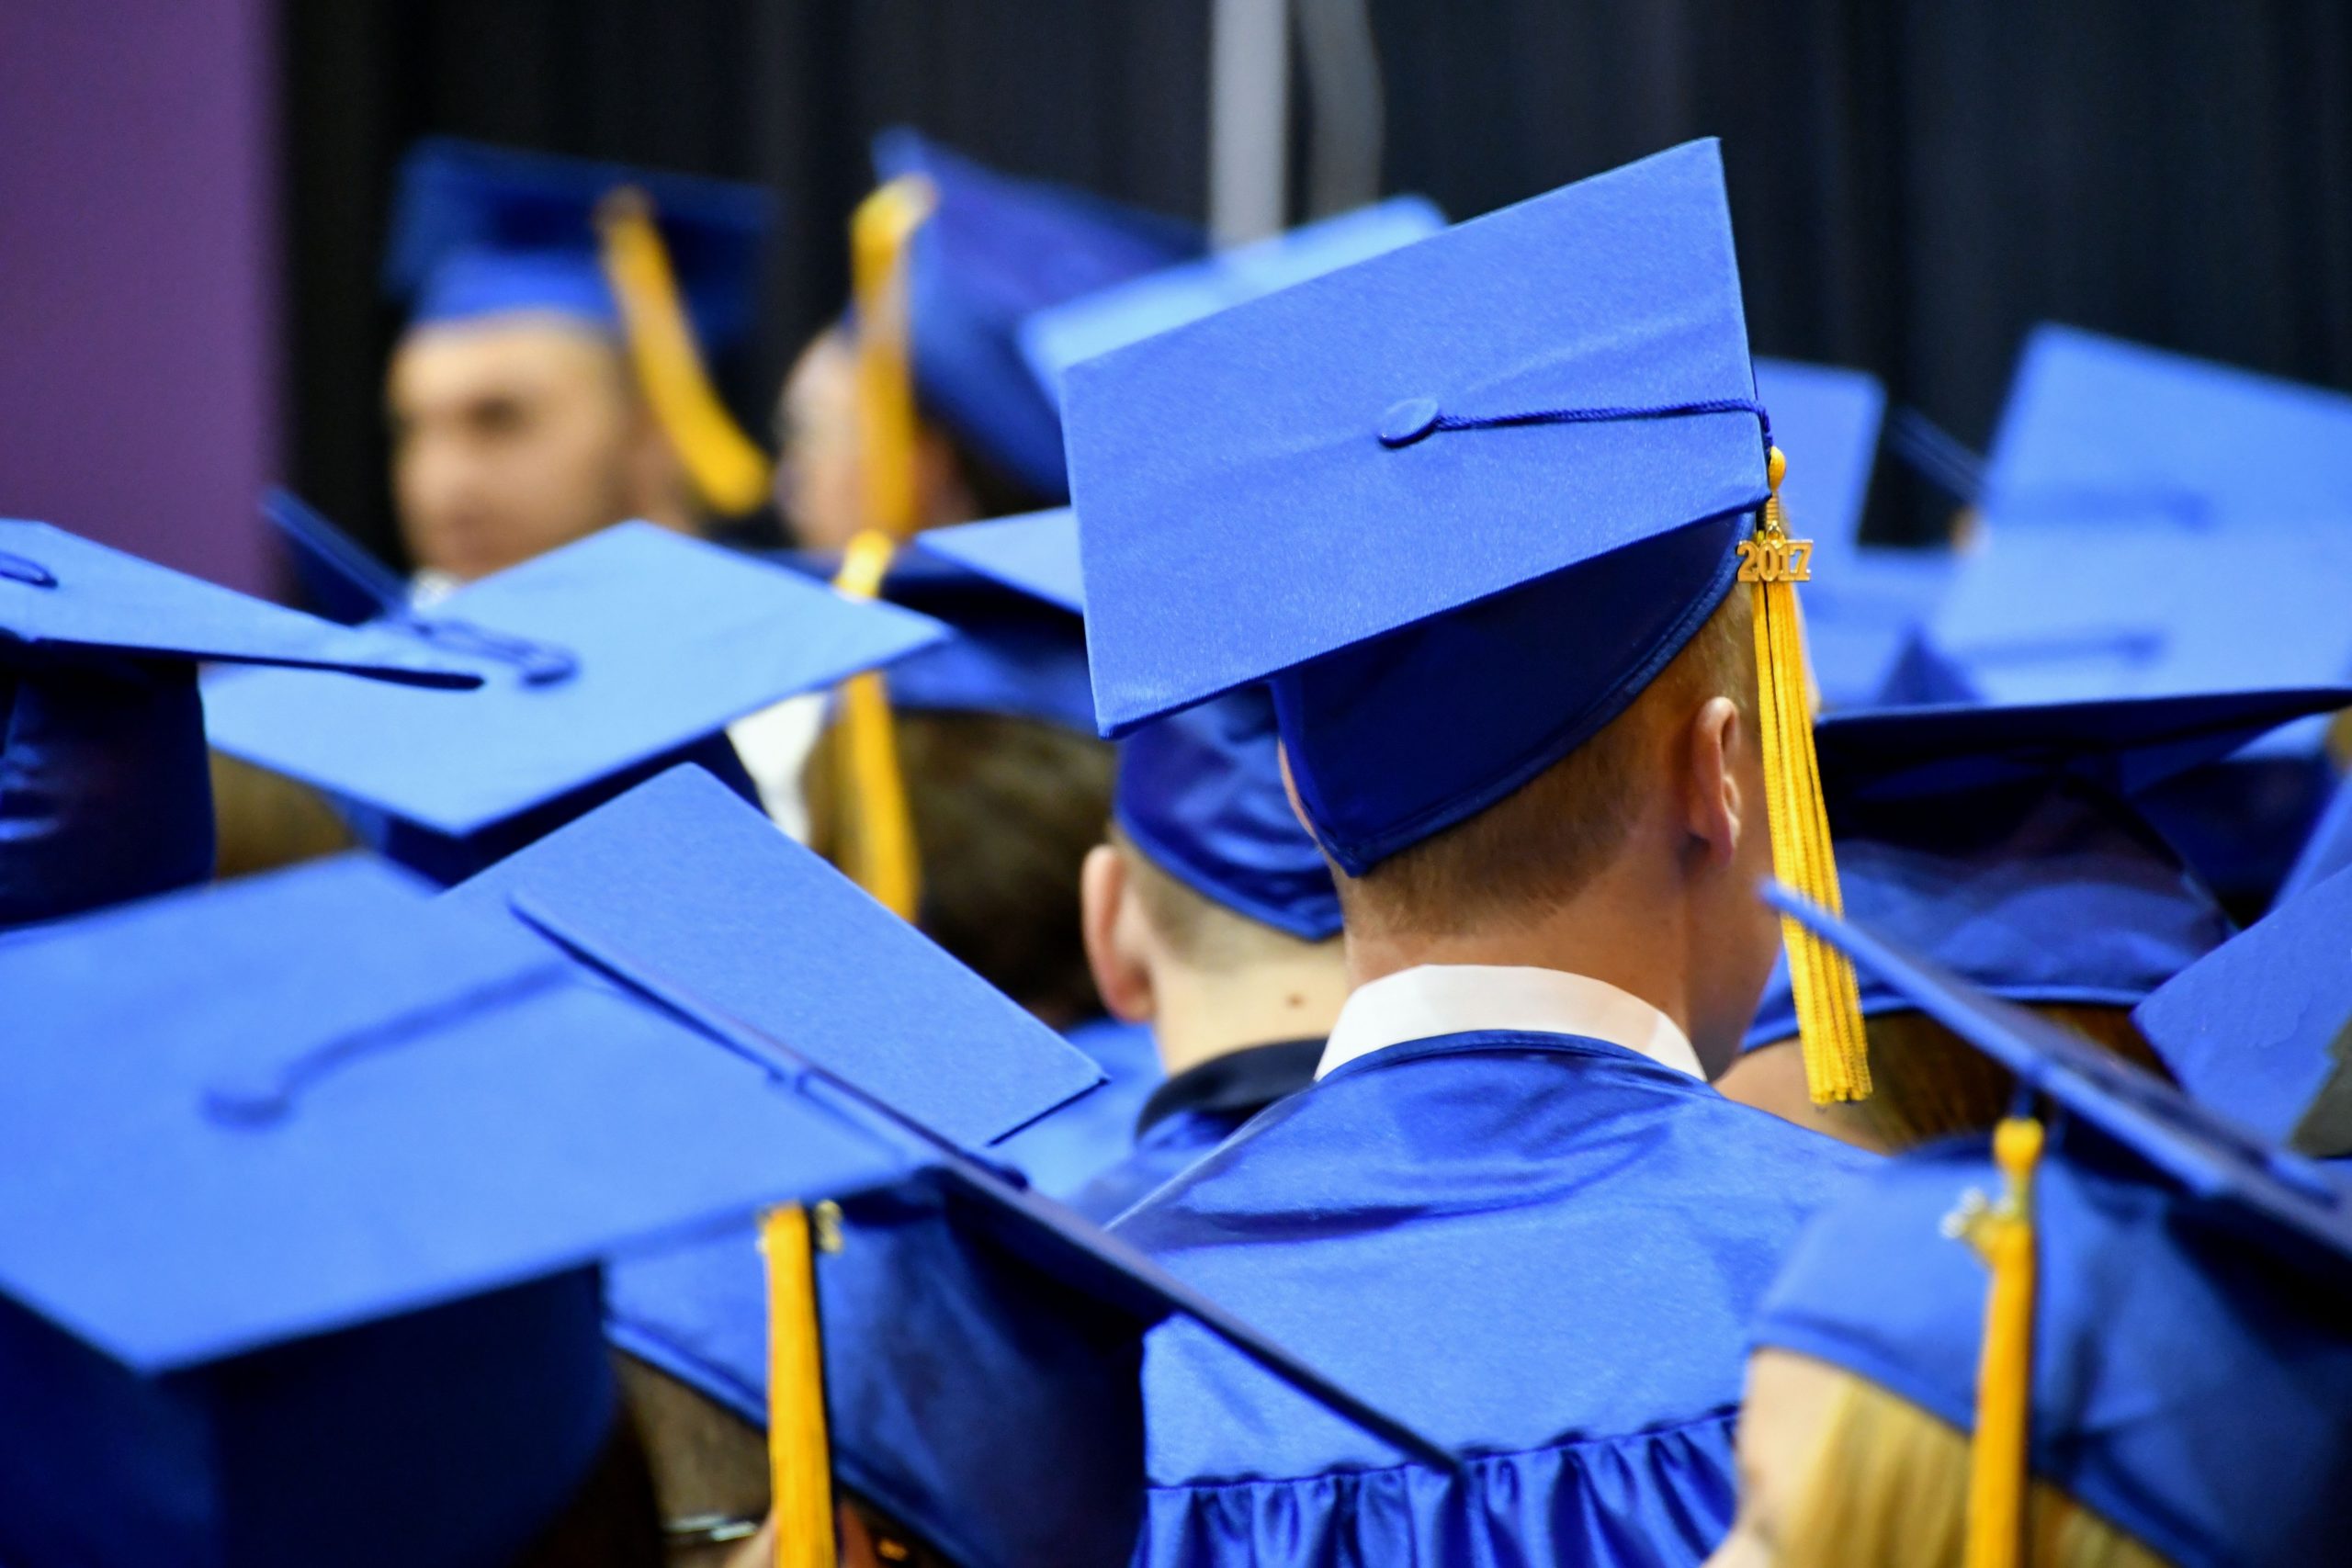 From behind, a close up of a single white male in a blue graduation cap and gown, surrounded by other graduates wearing the same caps and gowns.